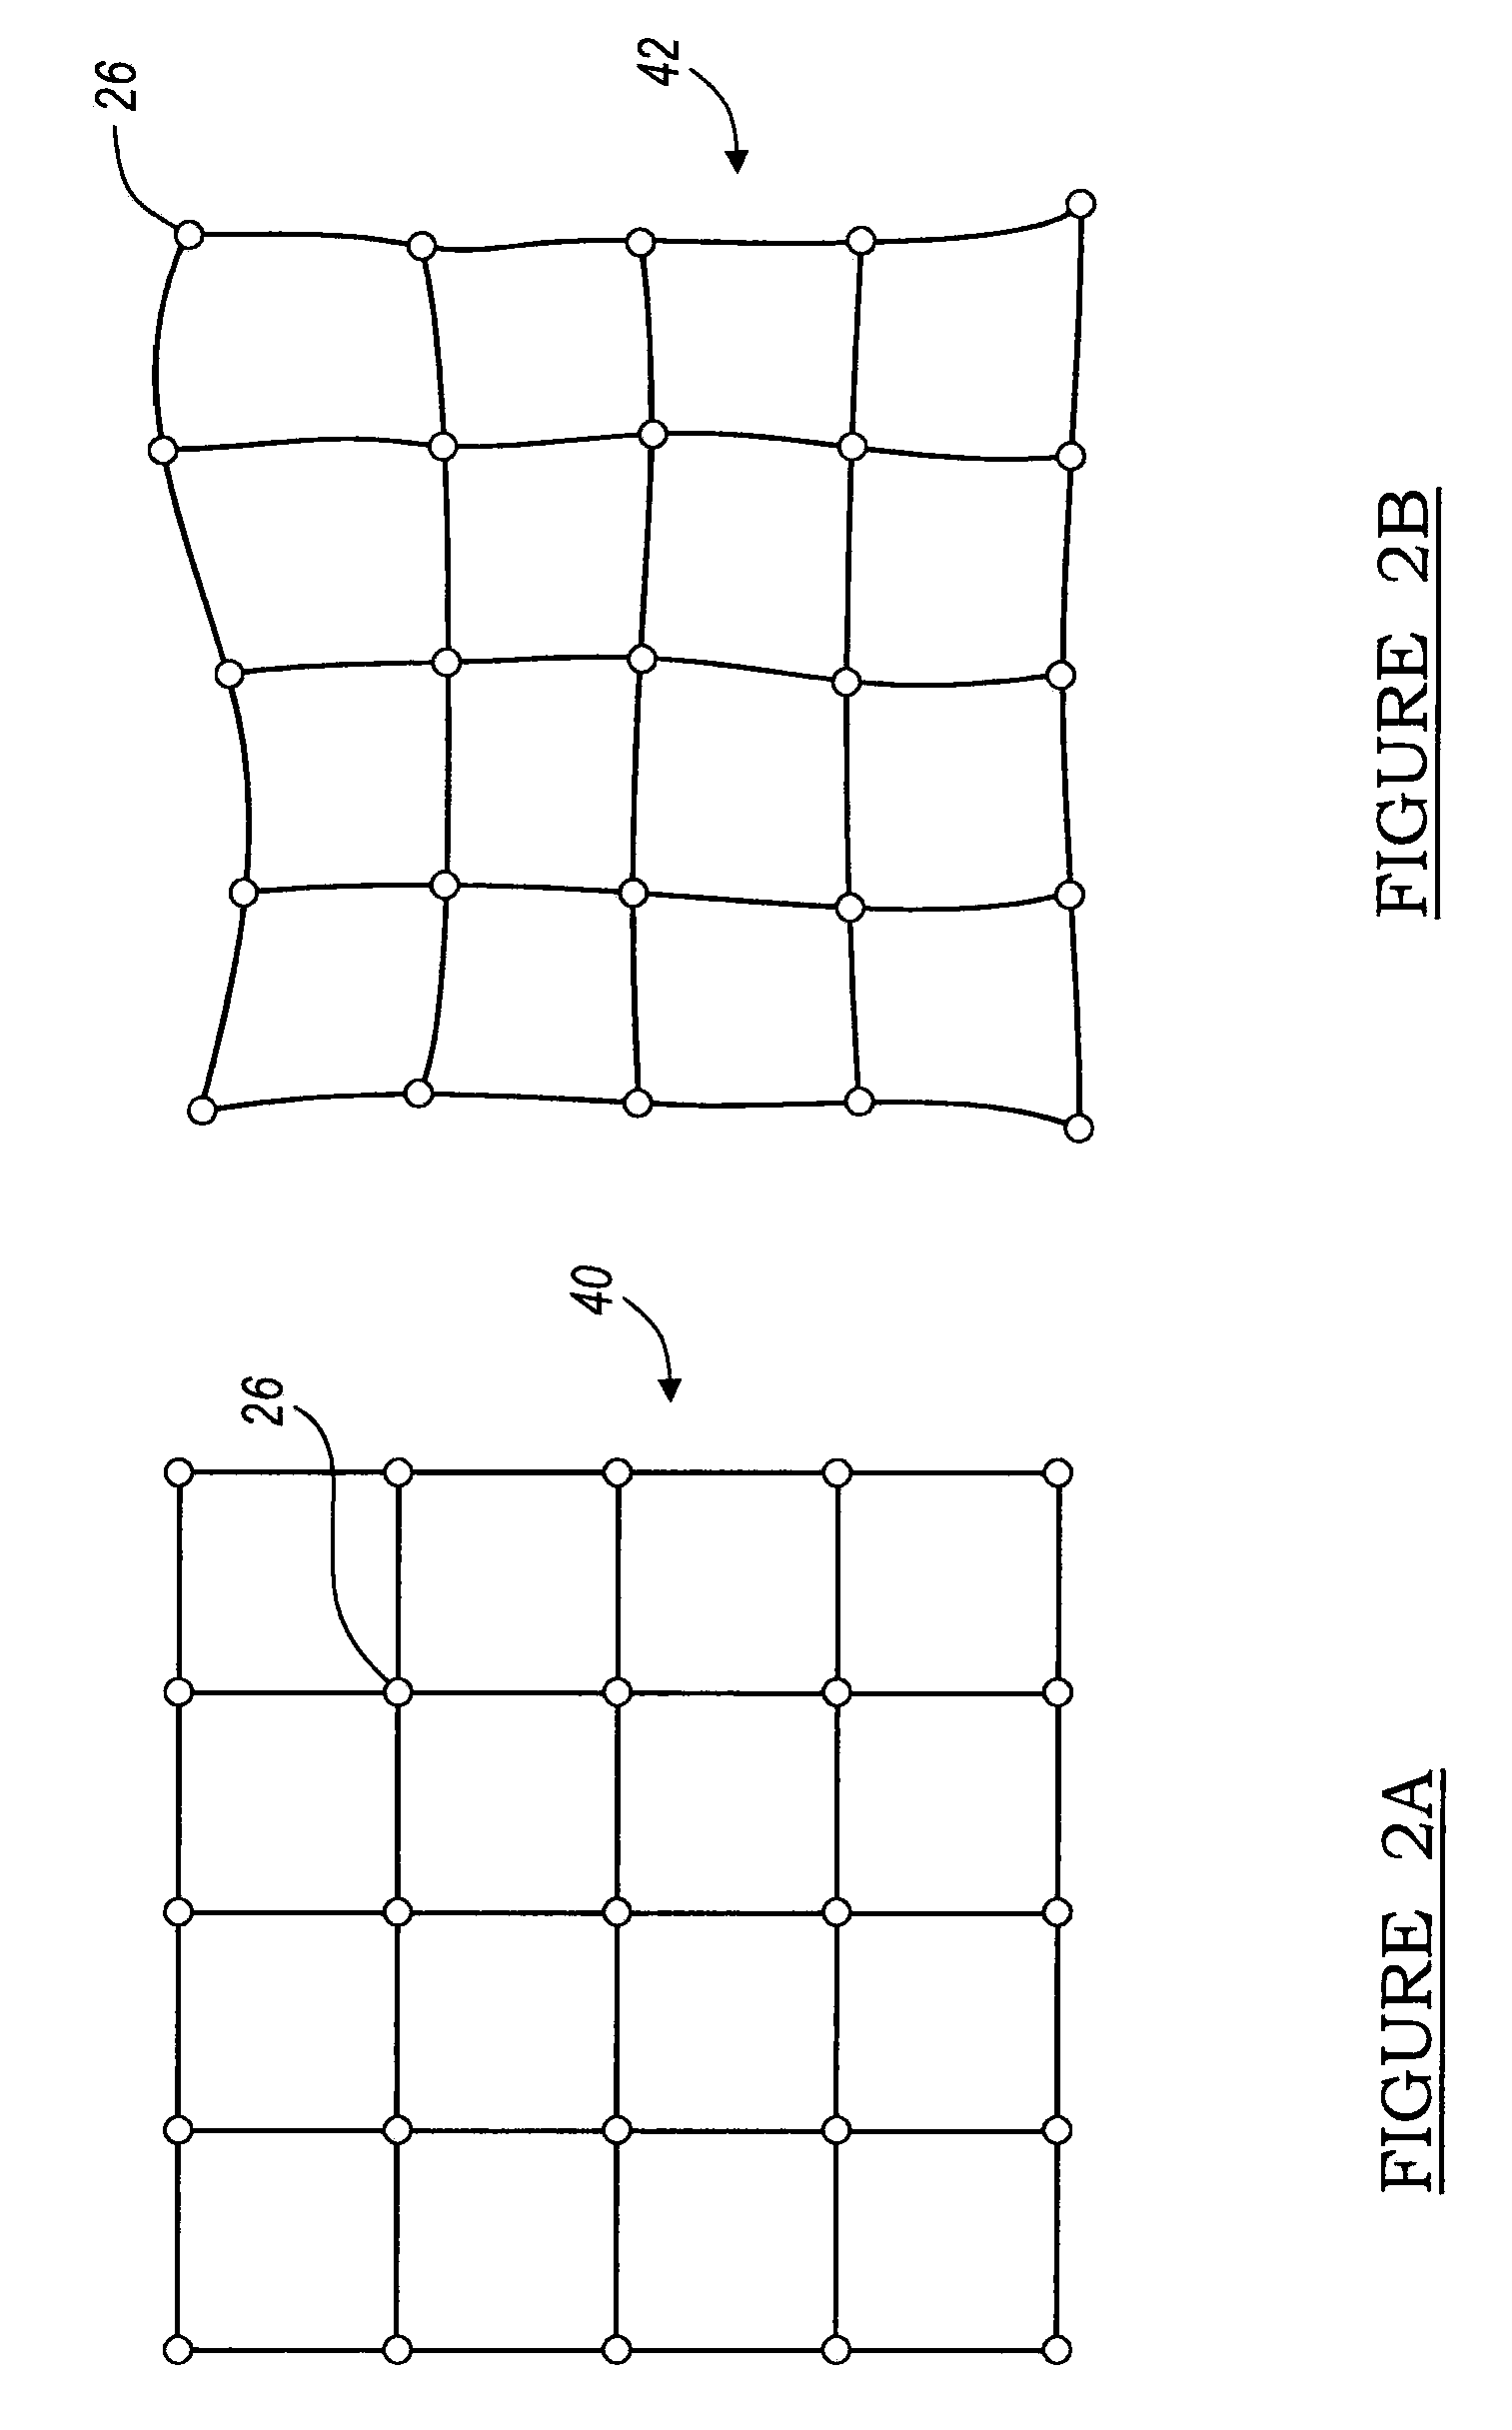 Navigation system for cardiac therapies using gating